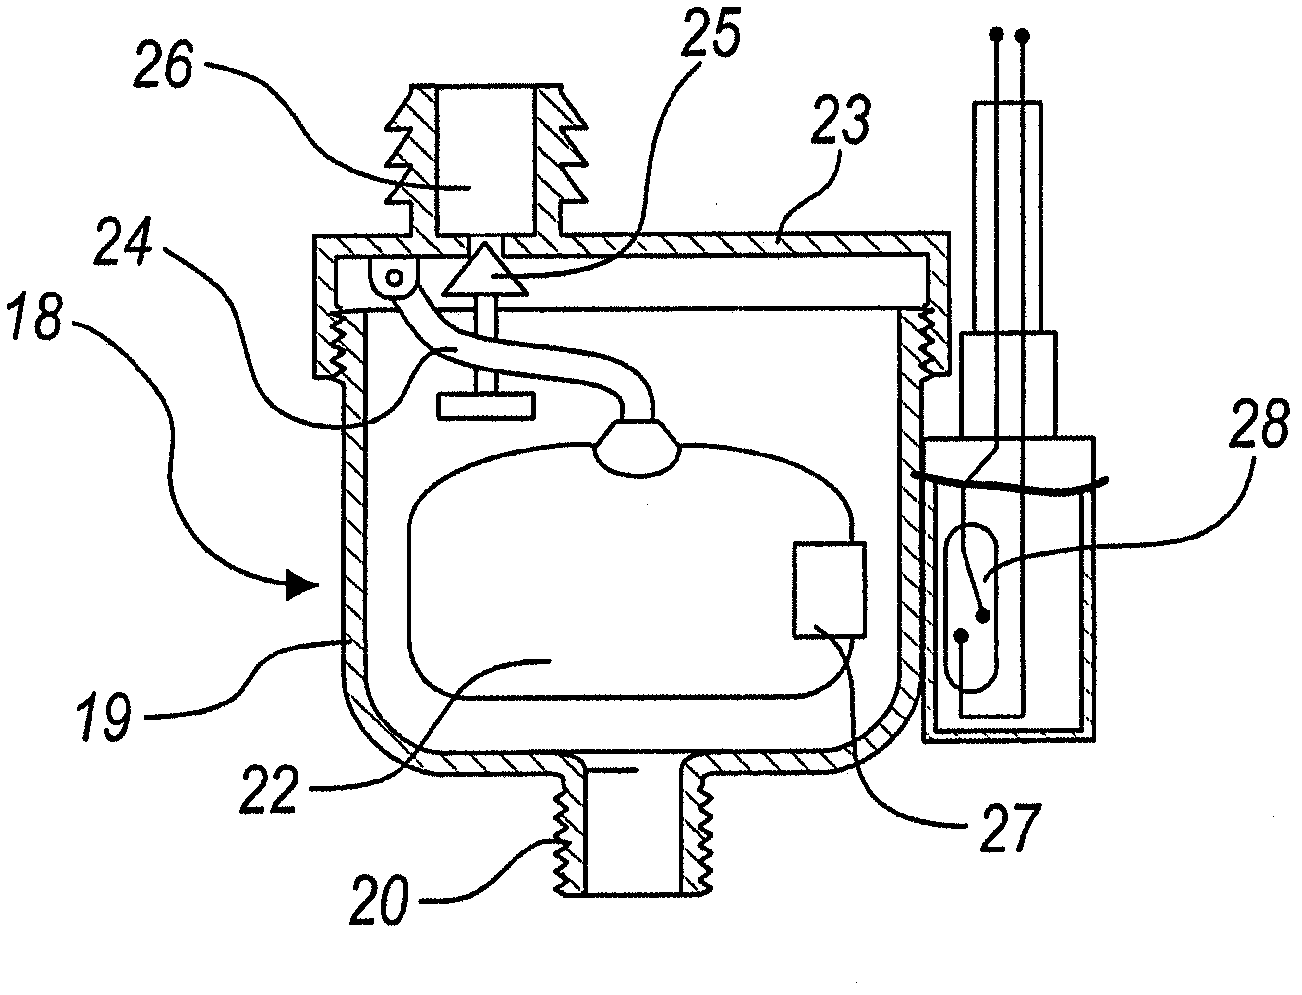 Priming device for electric pumps